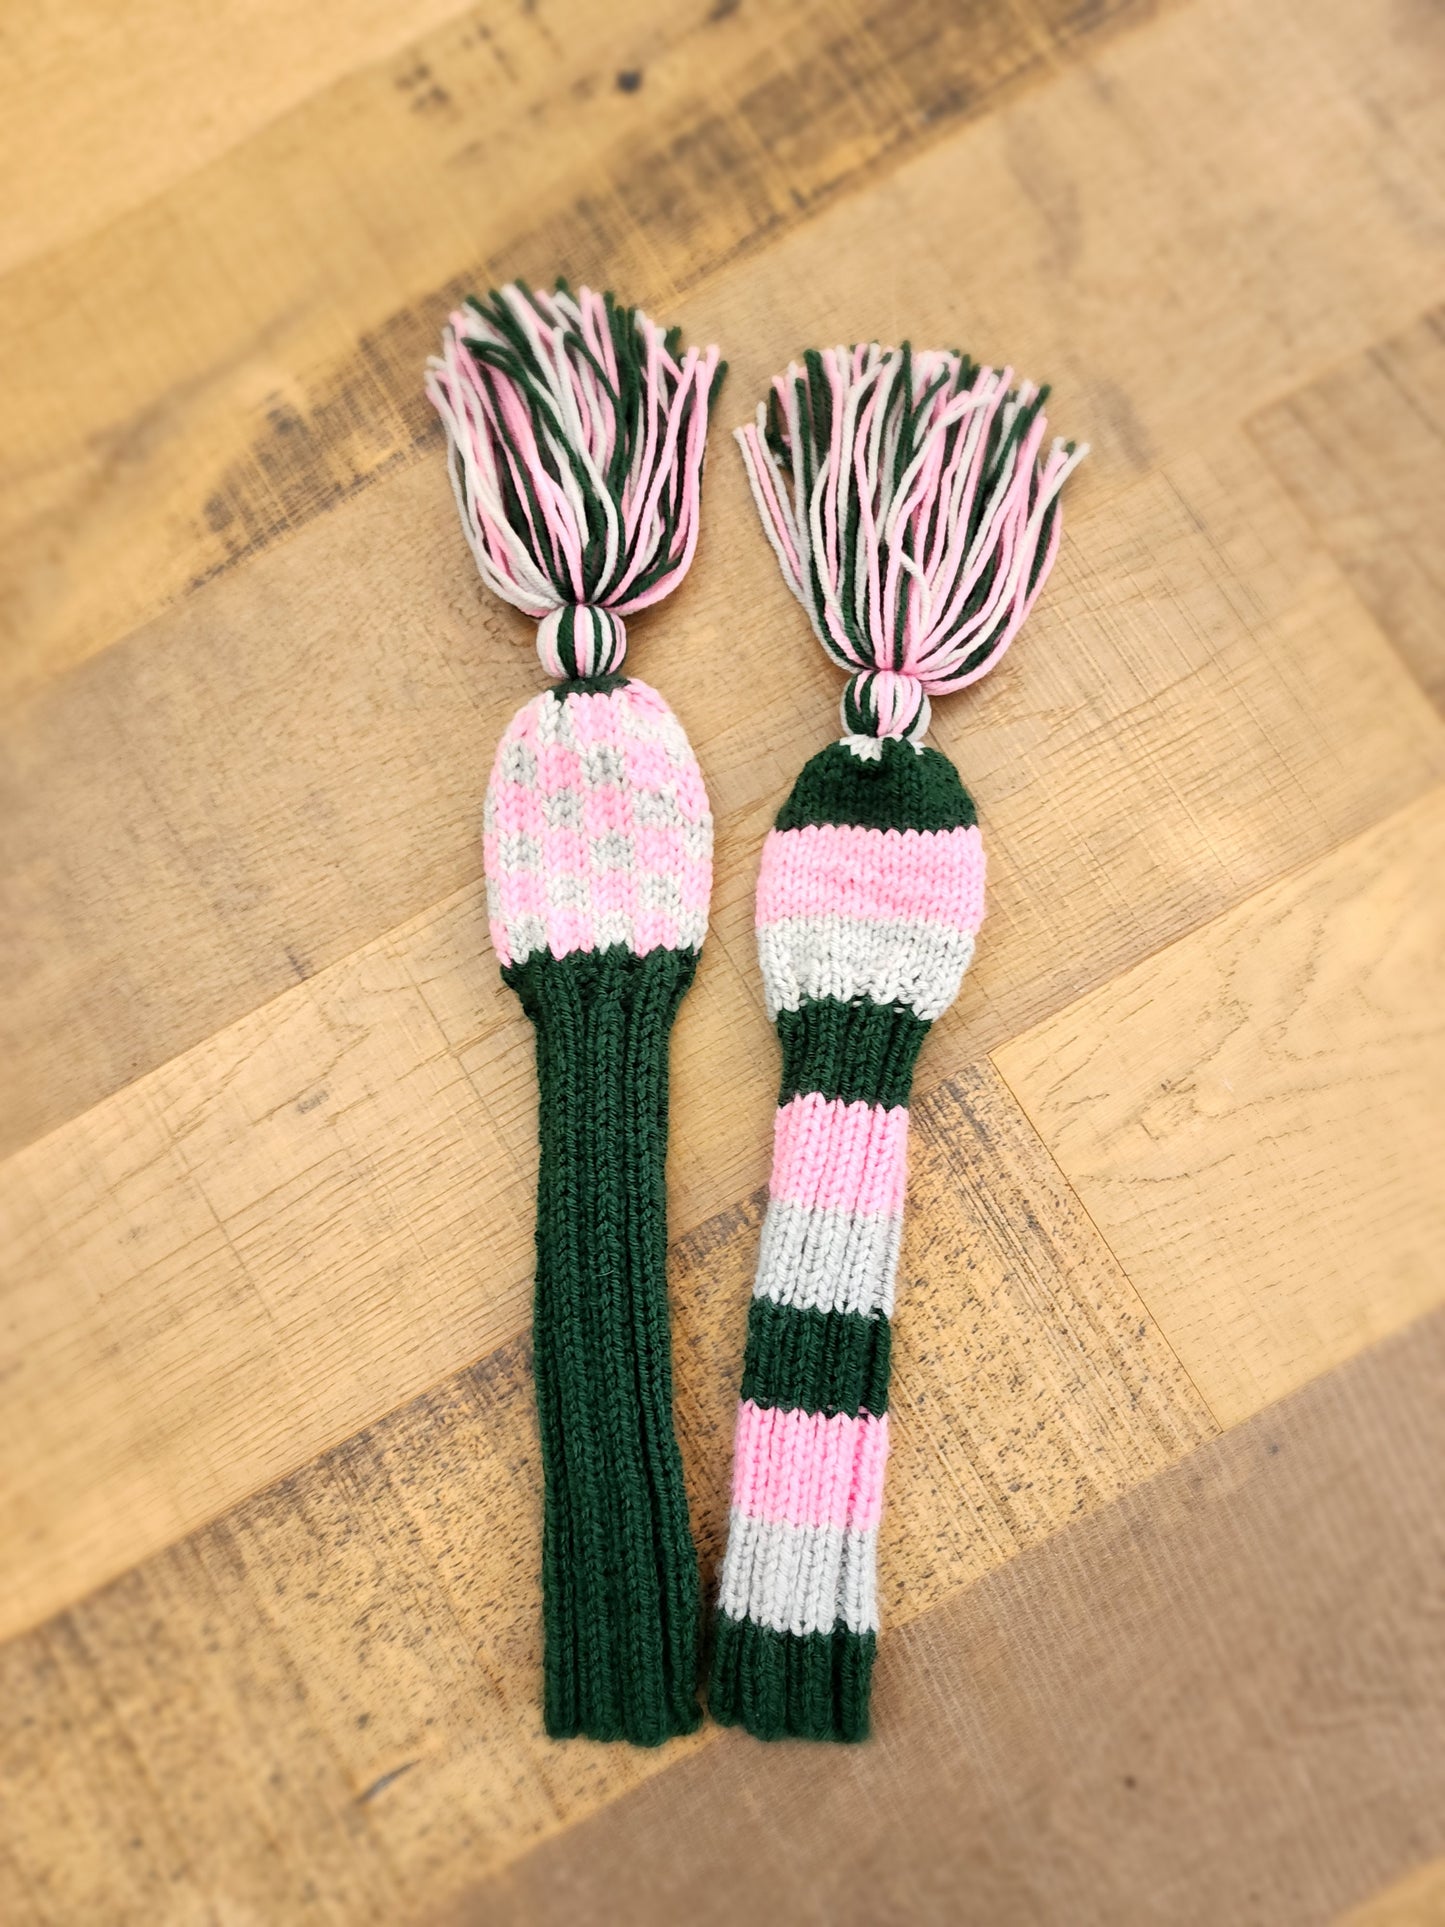 Two Golf Club Head Covers Retro-Vintage Pink, Green & Gray with Tassels for Fairway Woods - Austinknittylimits